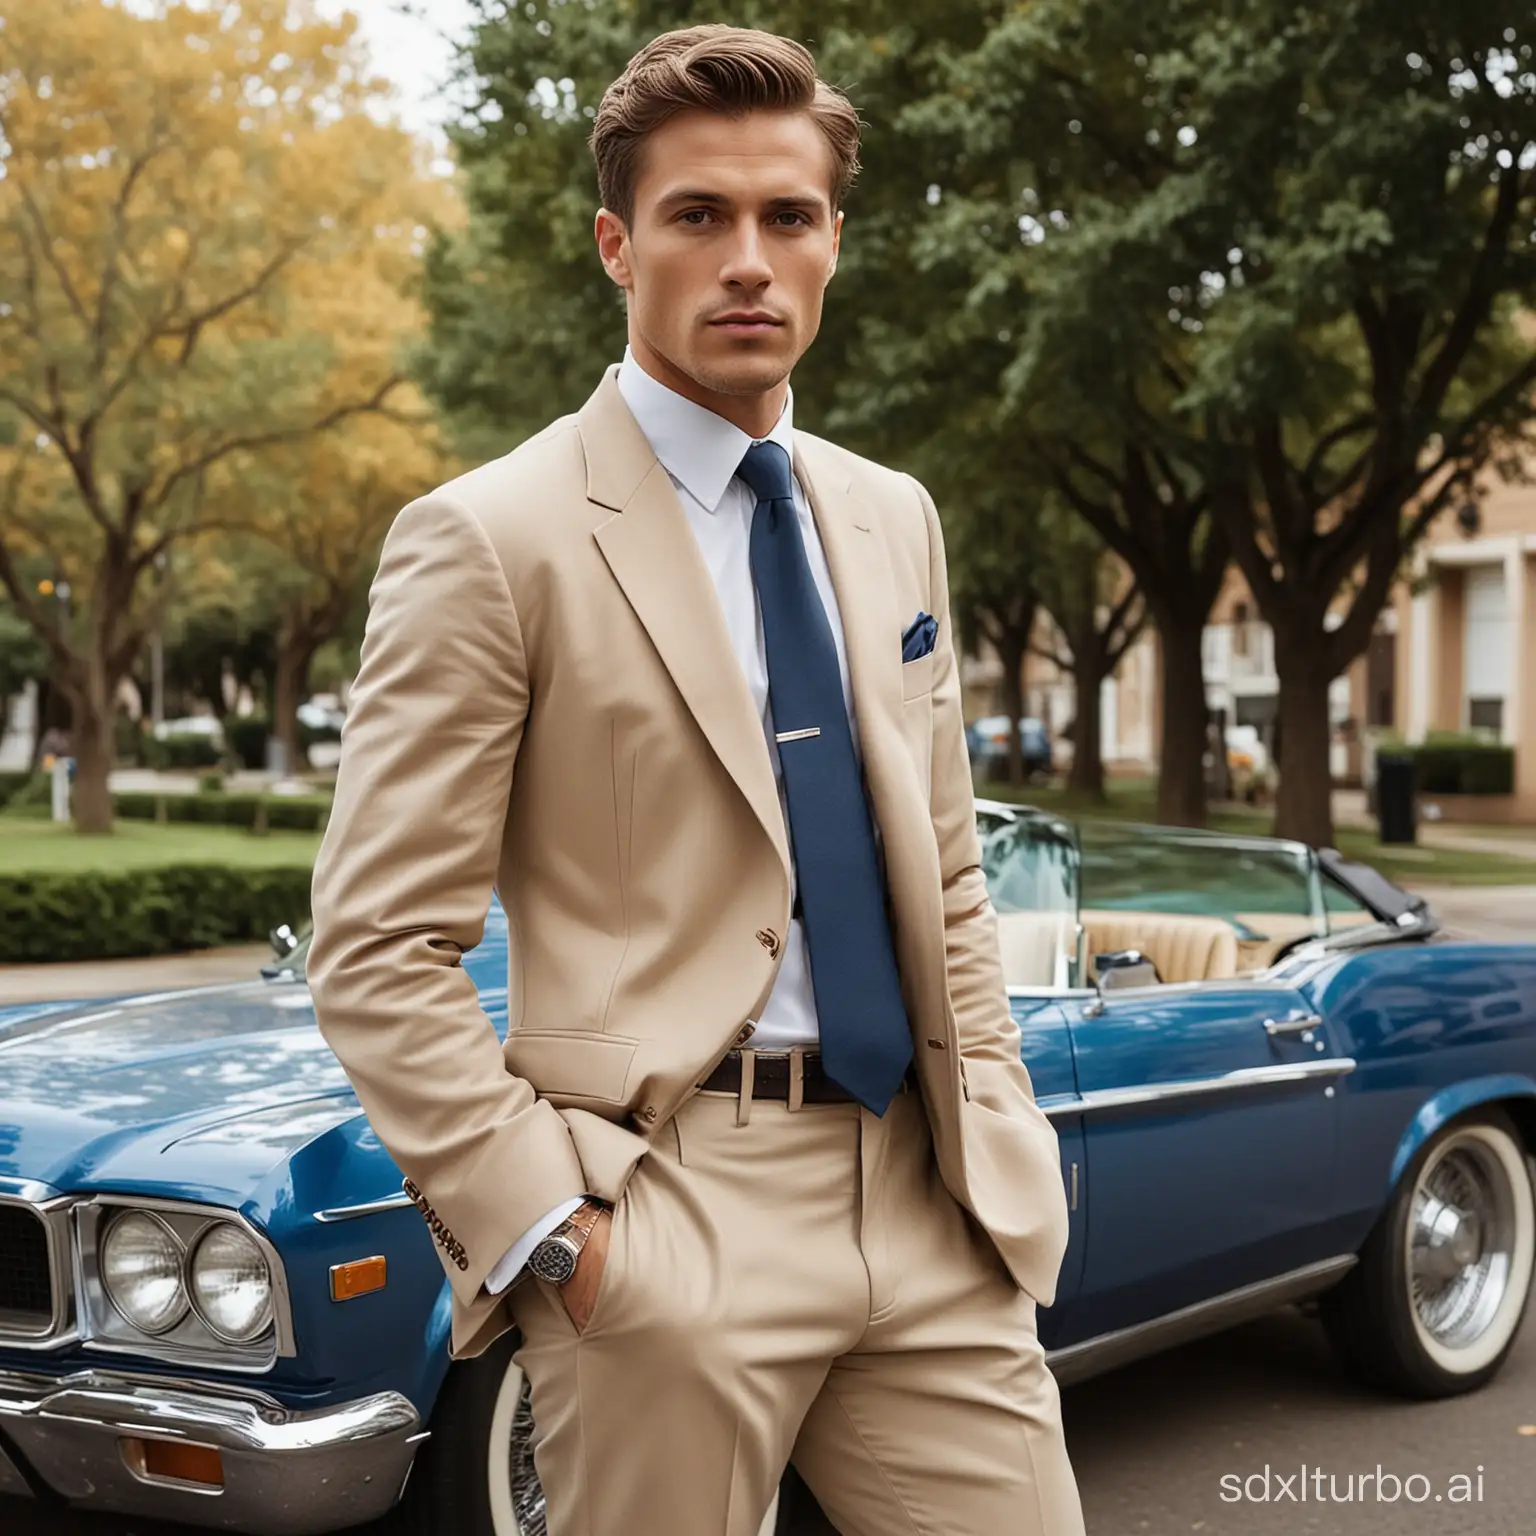 A man is captured in a photograph wearing a sophisticated tan suit paired with a crisp white shirt and a stylish blue tie. The man appears to be in his late twenties and exudes a sense of confidence. He is standing on a street, surrounded by some trees in the background. Additionally, the image also includes a black car on the left side and a silver car on the right side. The man''s outfit is complemented by a sleek belt and a classic watch on his wrist. The overall color palette of the image consists of soft neutrals like tan, blue, and black, creating a timeless and elegant aesthetic.